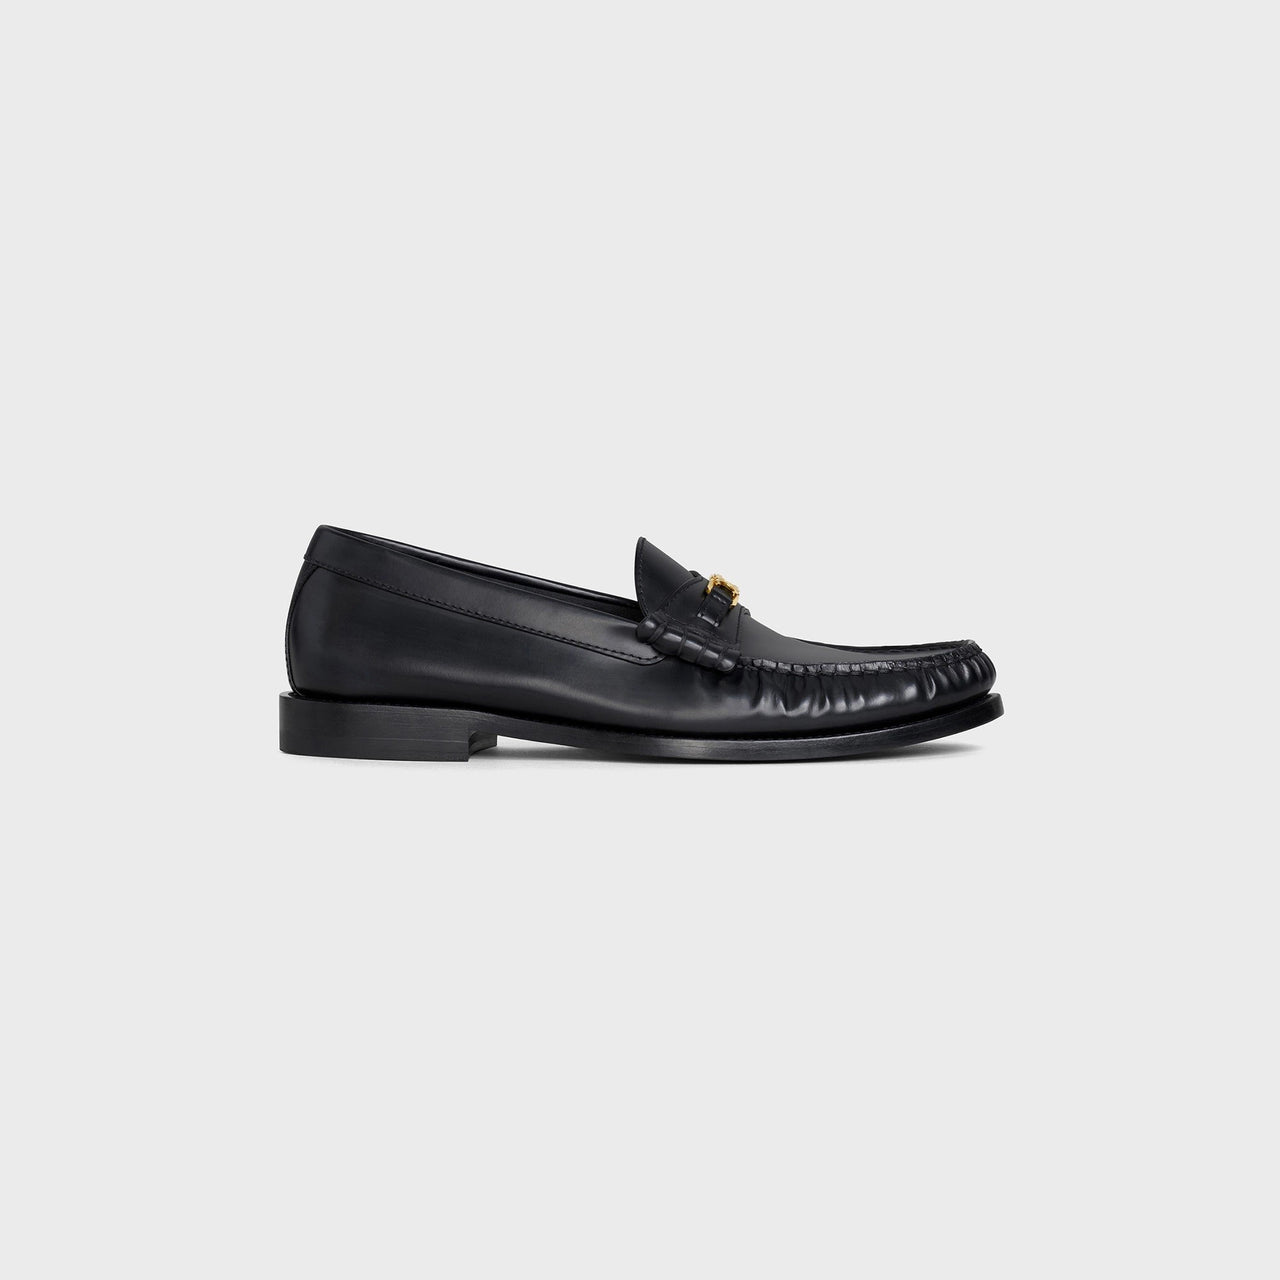 Hong Kong Stock - Celine Luco Triomphe Loafter in Polished Calfskin (Black) (Size 39)